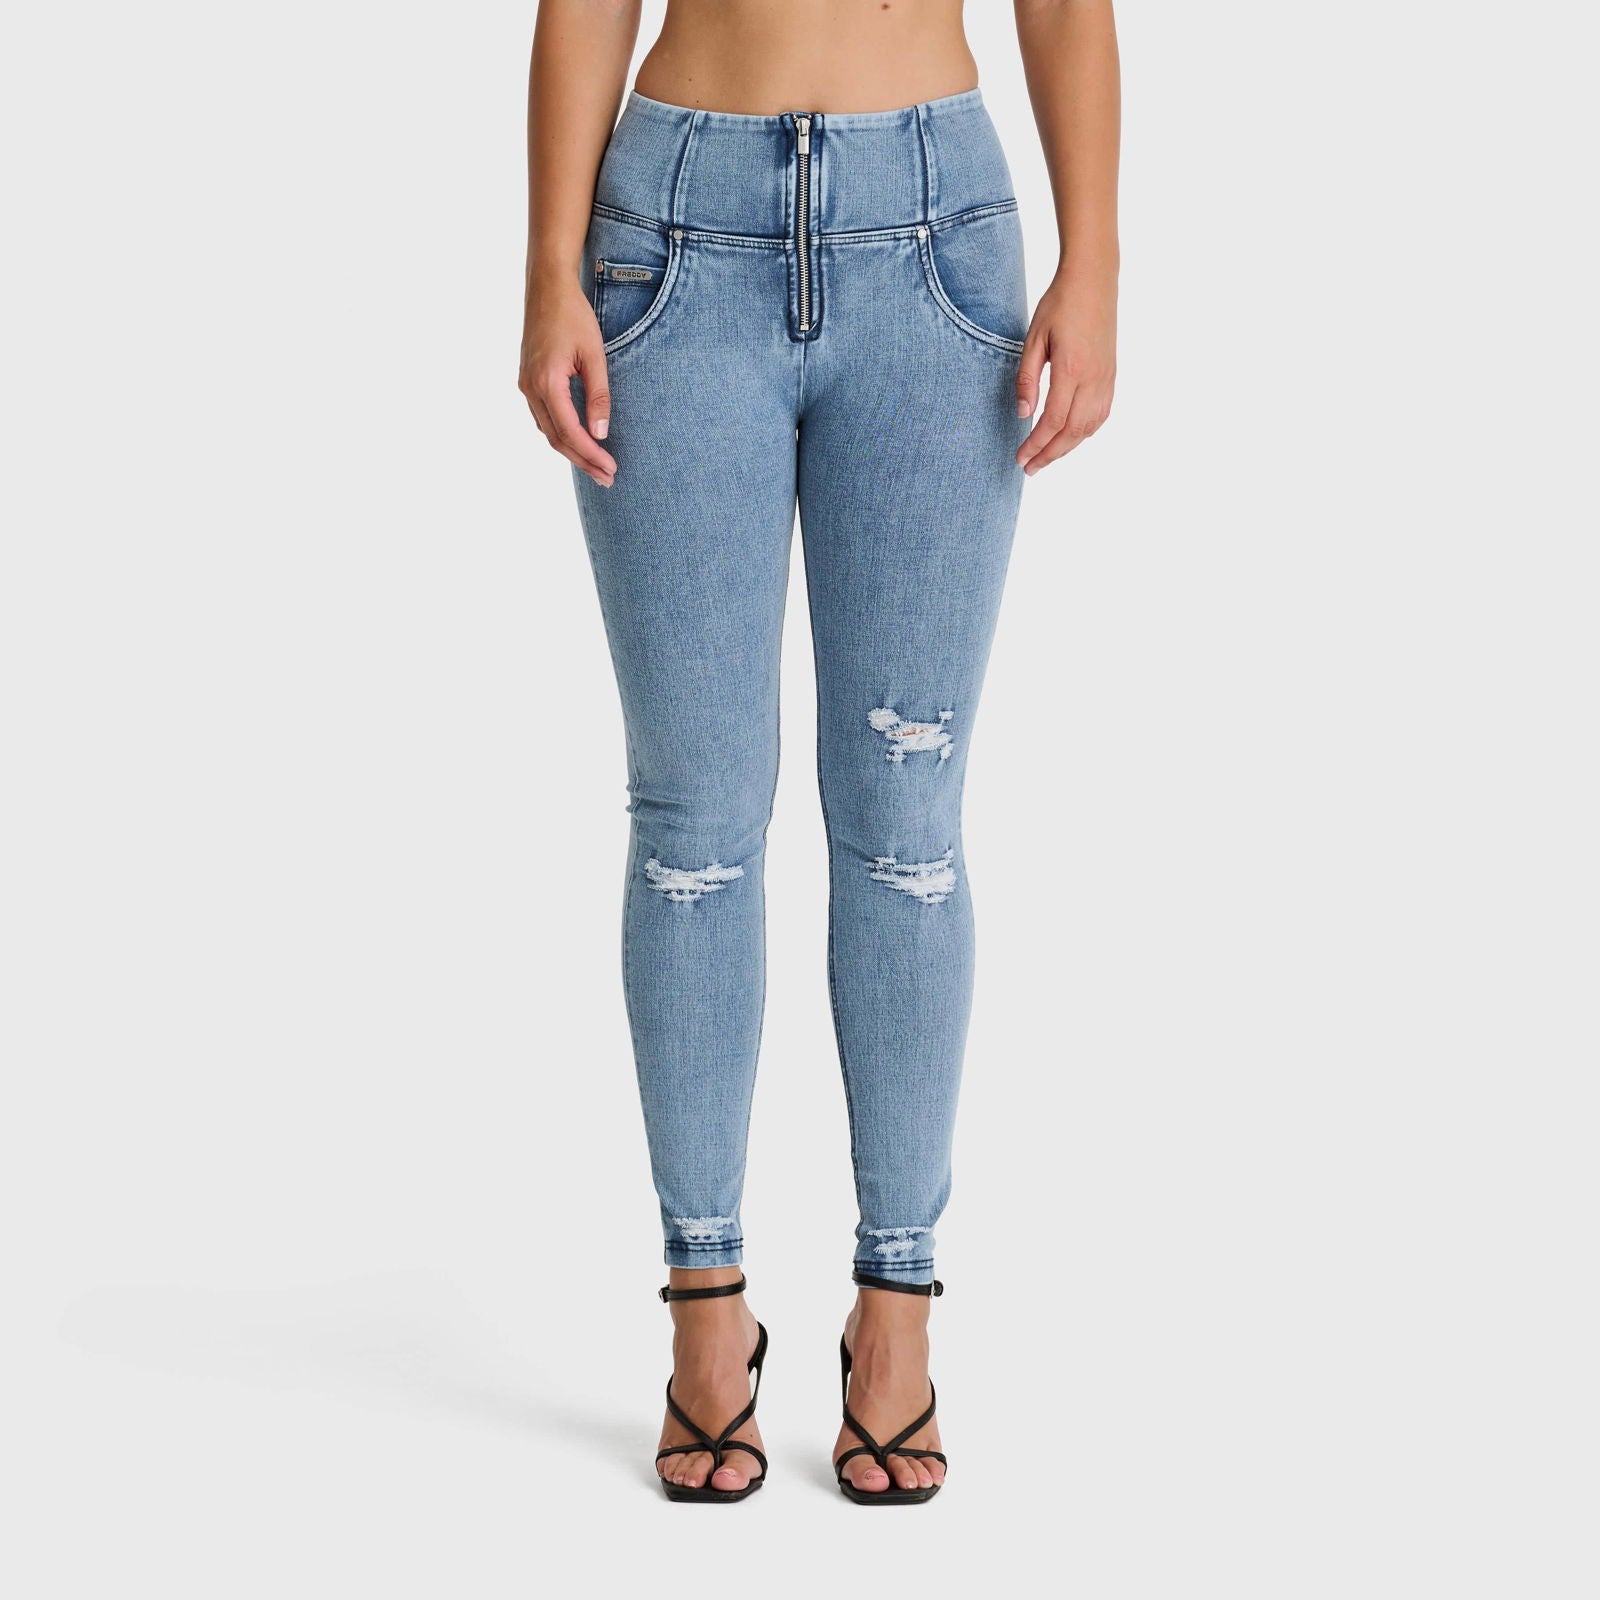 WR.UP® SNUG Distressed Jeans - High Waisted - Full Length - Light Blue + Blue Stitching 2